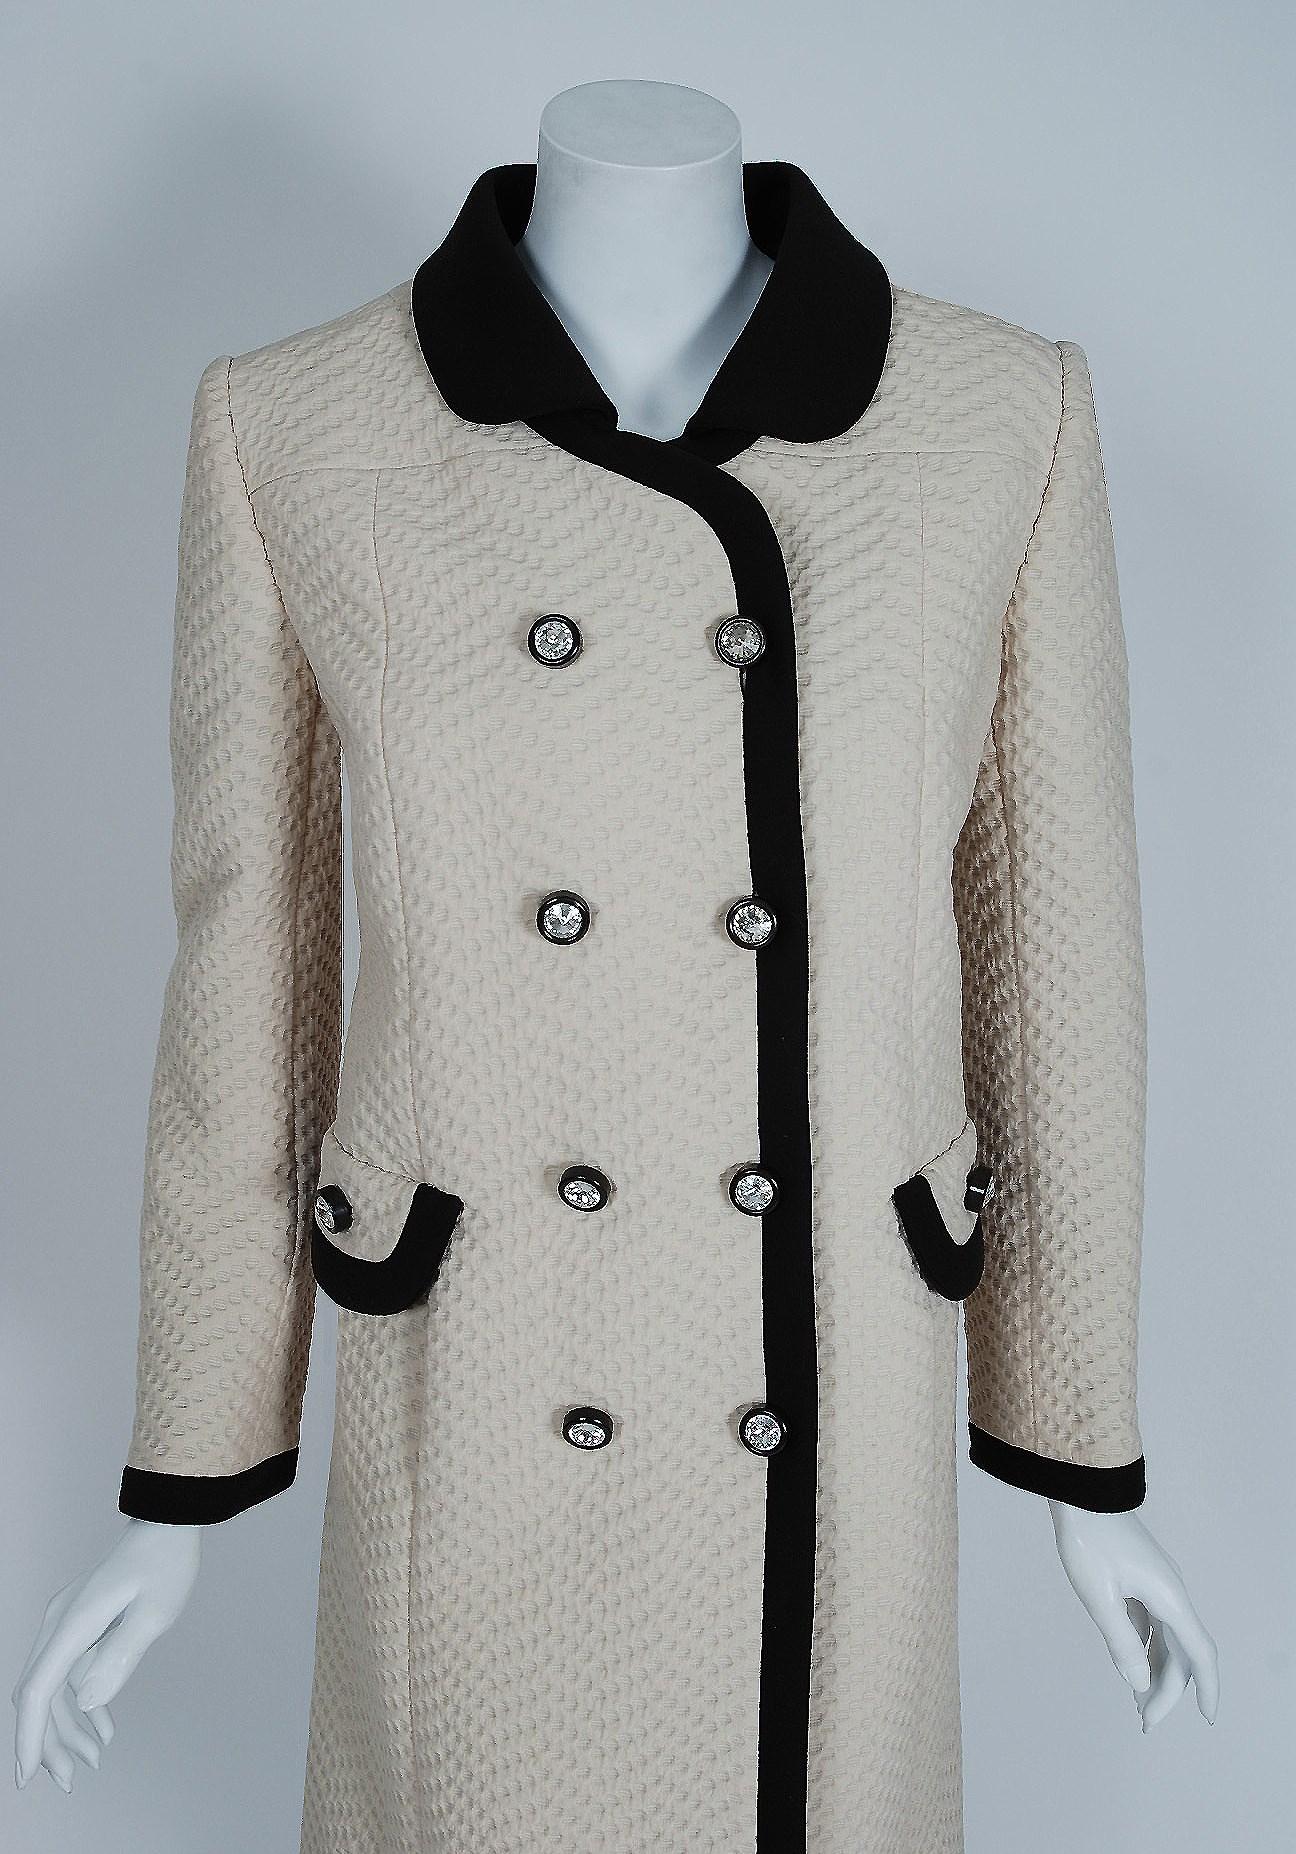 Stunning 1960's Ognibene Zendman Italian designer coat fashioned in the most fabulous crème & black waffle silk-pique. Founded in 1965, the Ognibene Zendman couture house was known for designing elegant, clean and tailored creations using muted